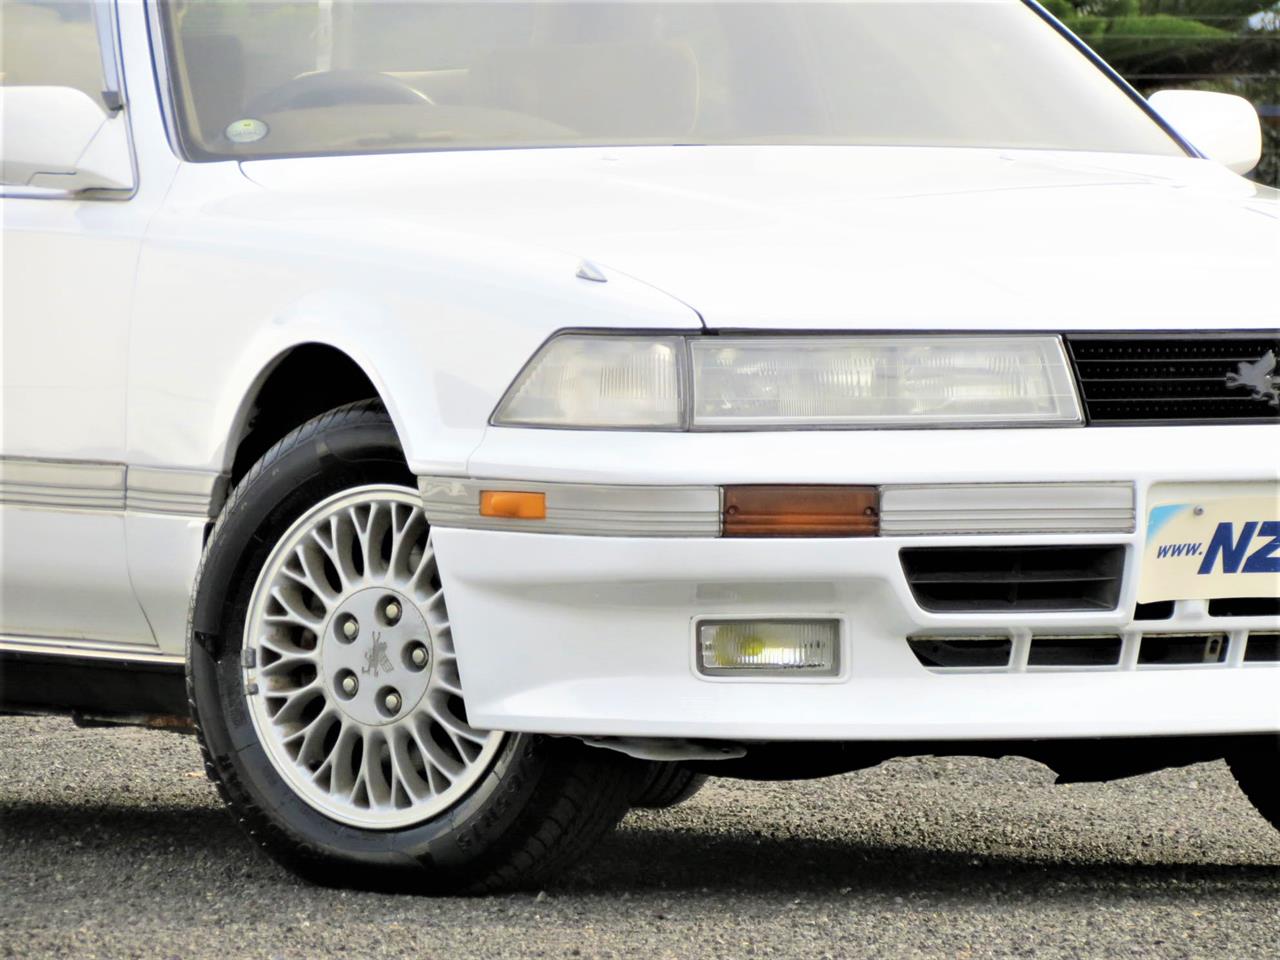 1989 Toyota SOARER only $64 weekly